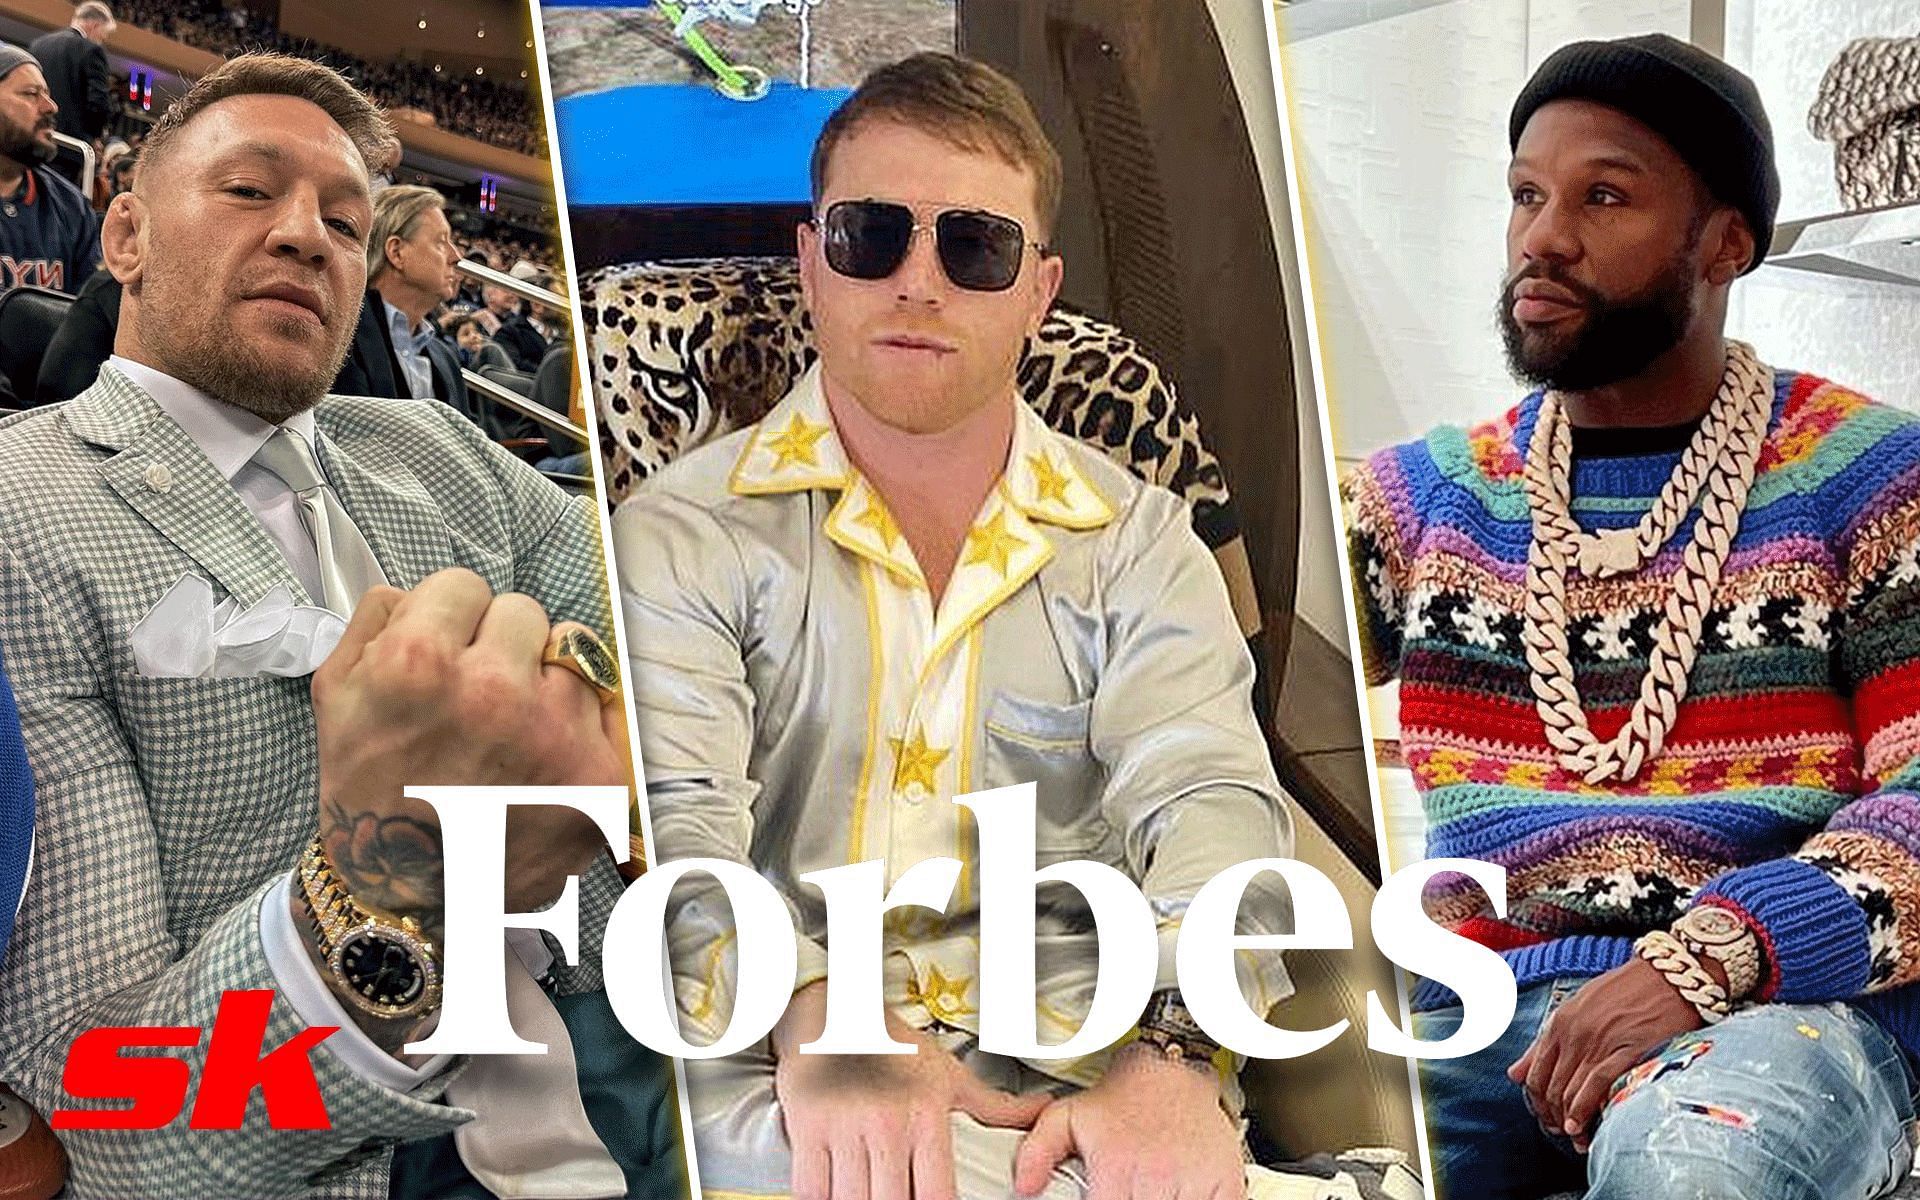 From the left- Conor McGregor, Canelo Alvarez and Floyd Mayweather [Image credits: @Forbes, @thenotoriousmma, @canelo and @floydmayweather on Instagram]